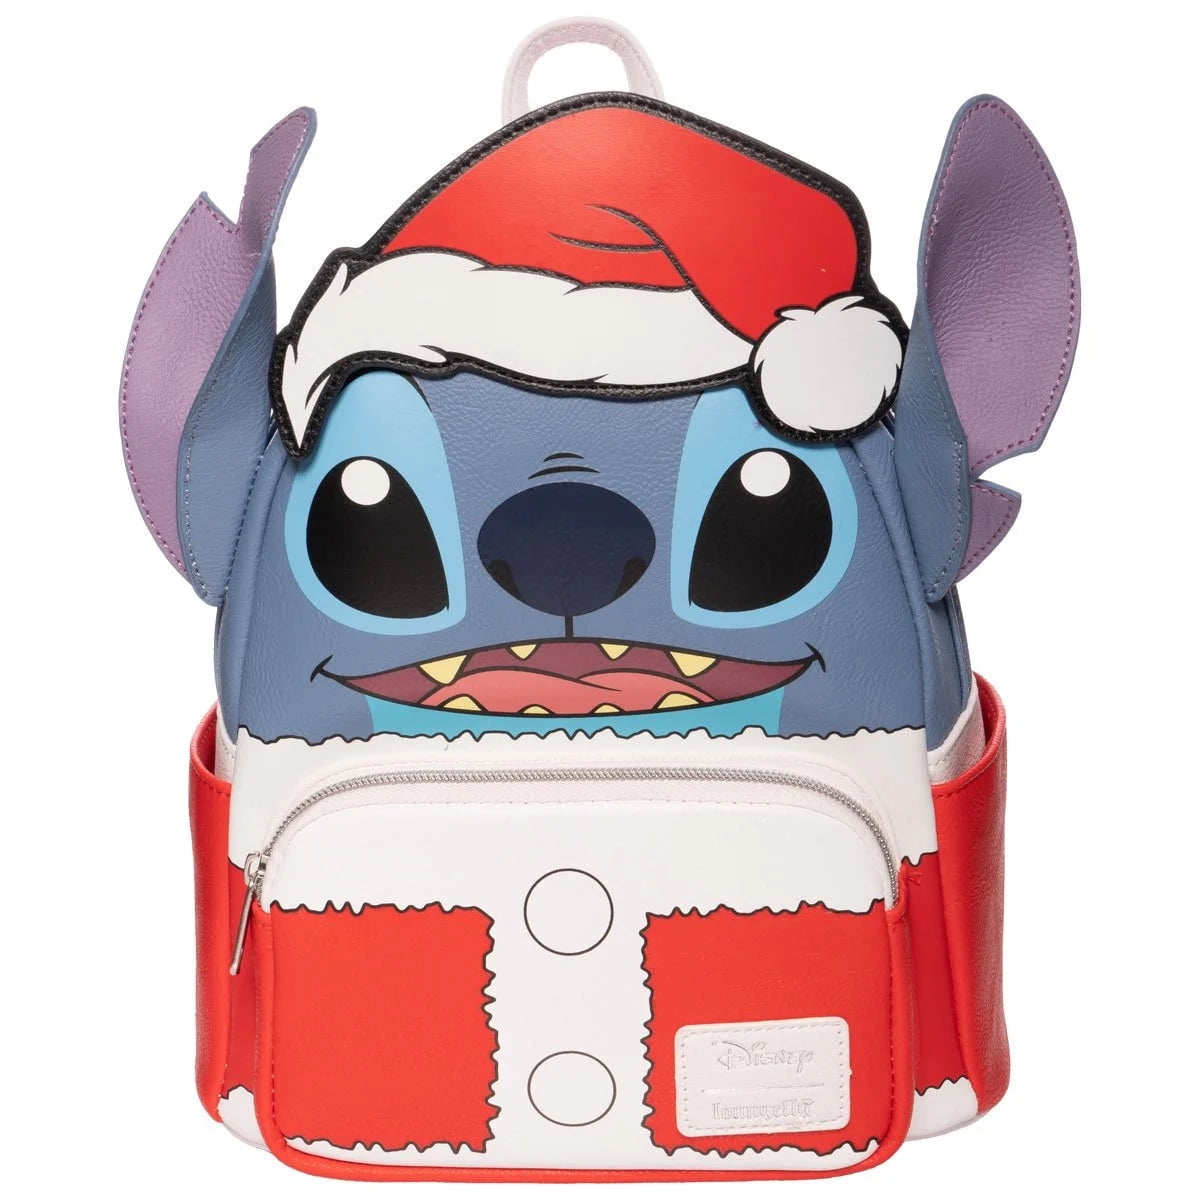 Stitch Gifts Lilo and Stitch Bag Lilo & Stitch Pastel Baby Blue Hand Bag w/ Matching Adjustable Shoulder Strap & Free Matching Gift for New Customers